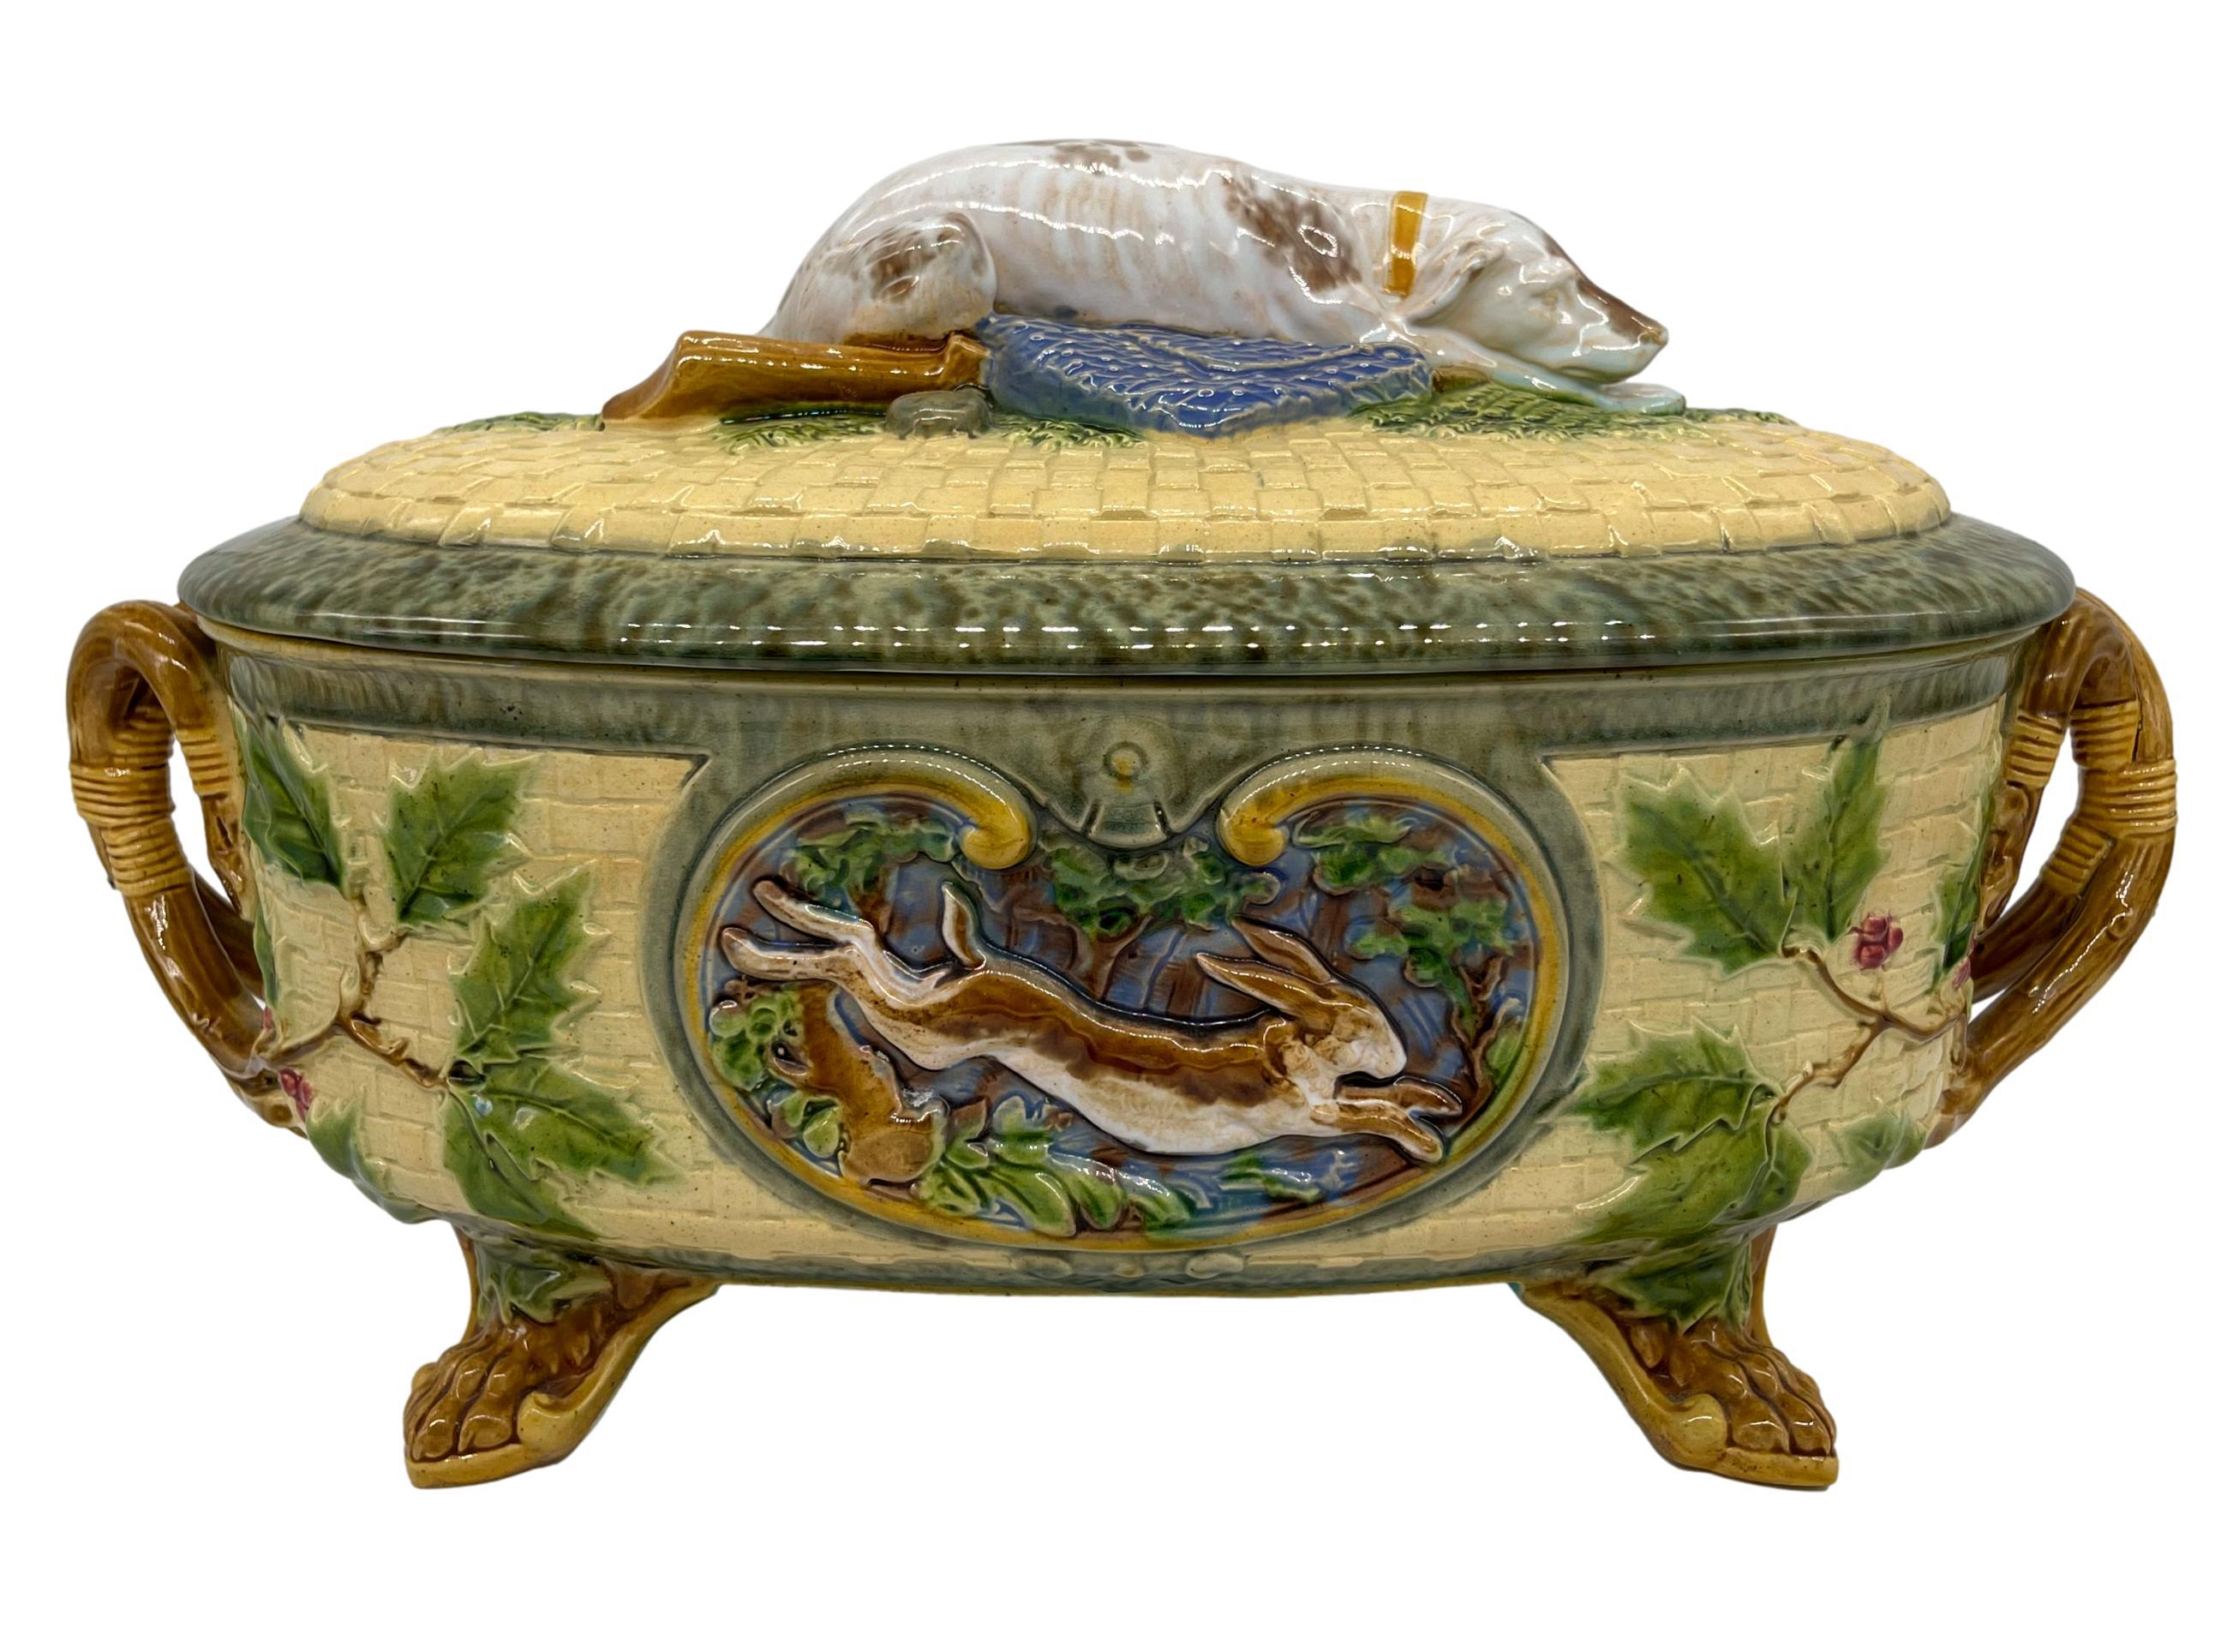 A Minton majolica two-handled game pie tureen and cover, the finial modelled as a sleeping hound recumbent on a bed of ferns, with shooting bag, gun and powder flasks, the dish molded with a pheasant within a cartouche, the reverse with a hare